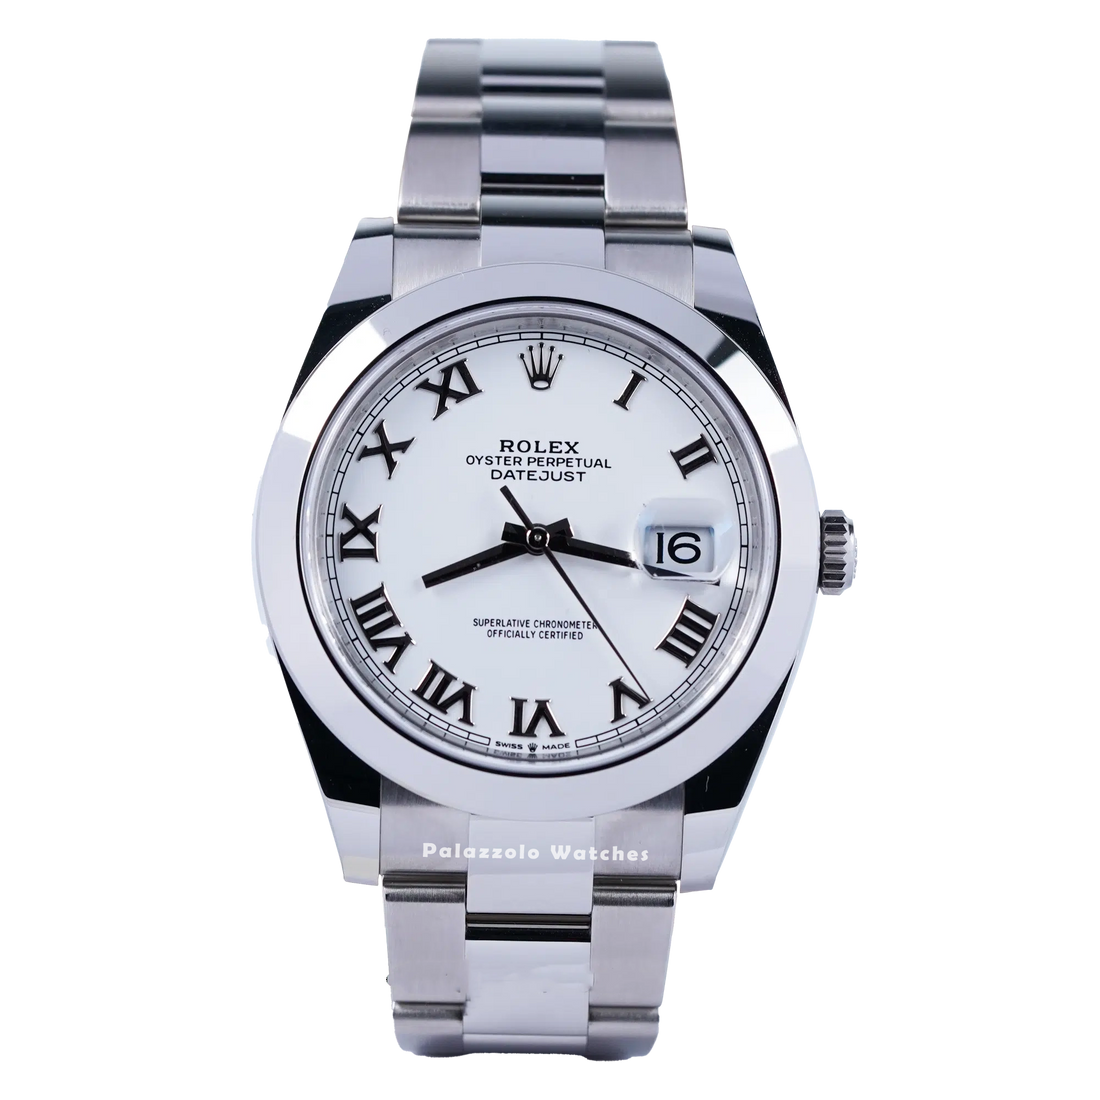 Rolex Datejust 41 White Roman Dial - Palazzolo Watches